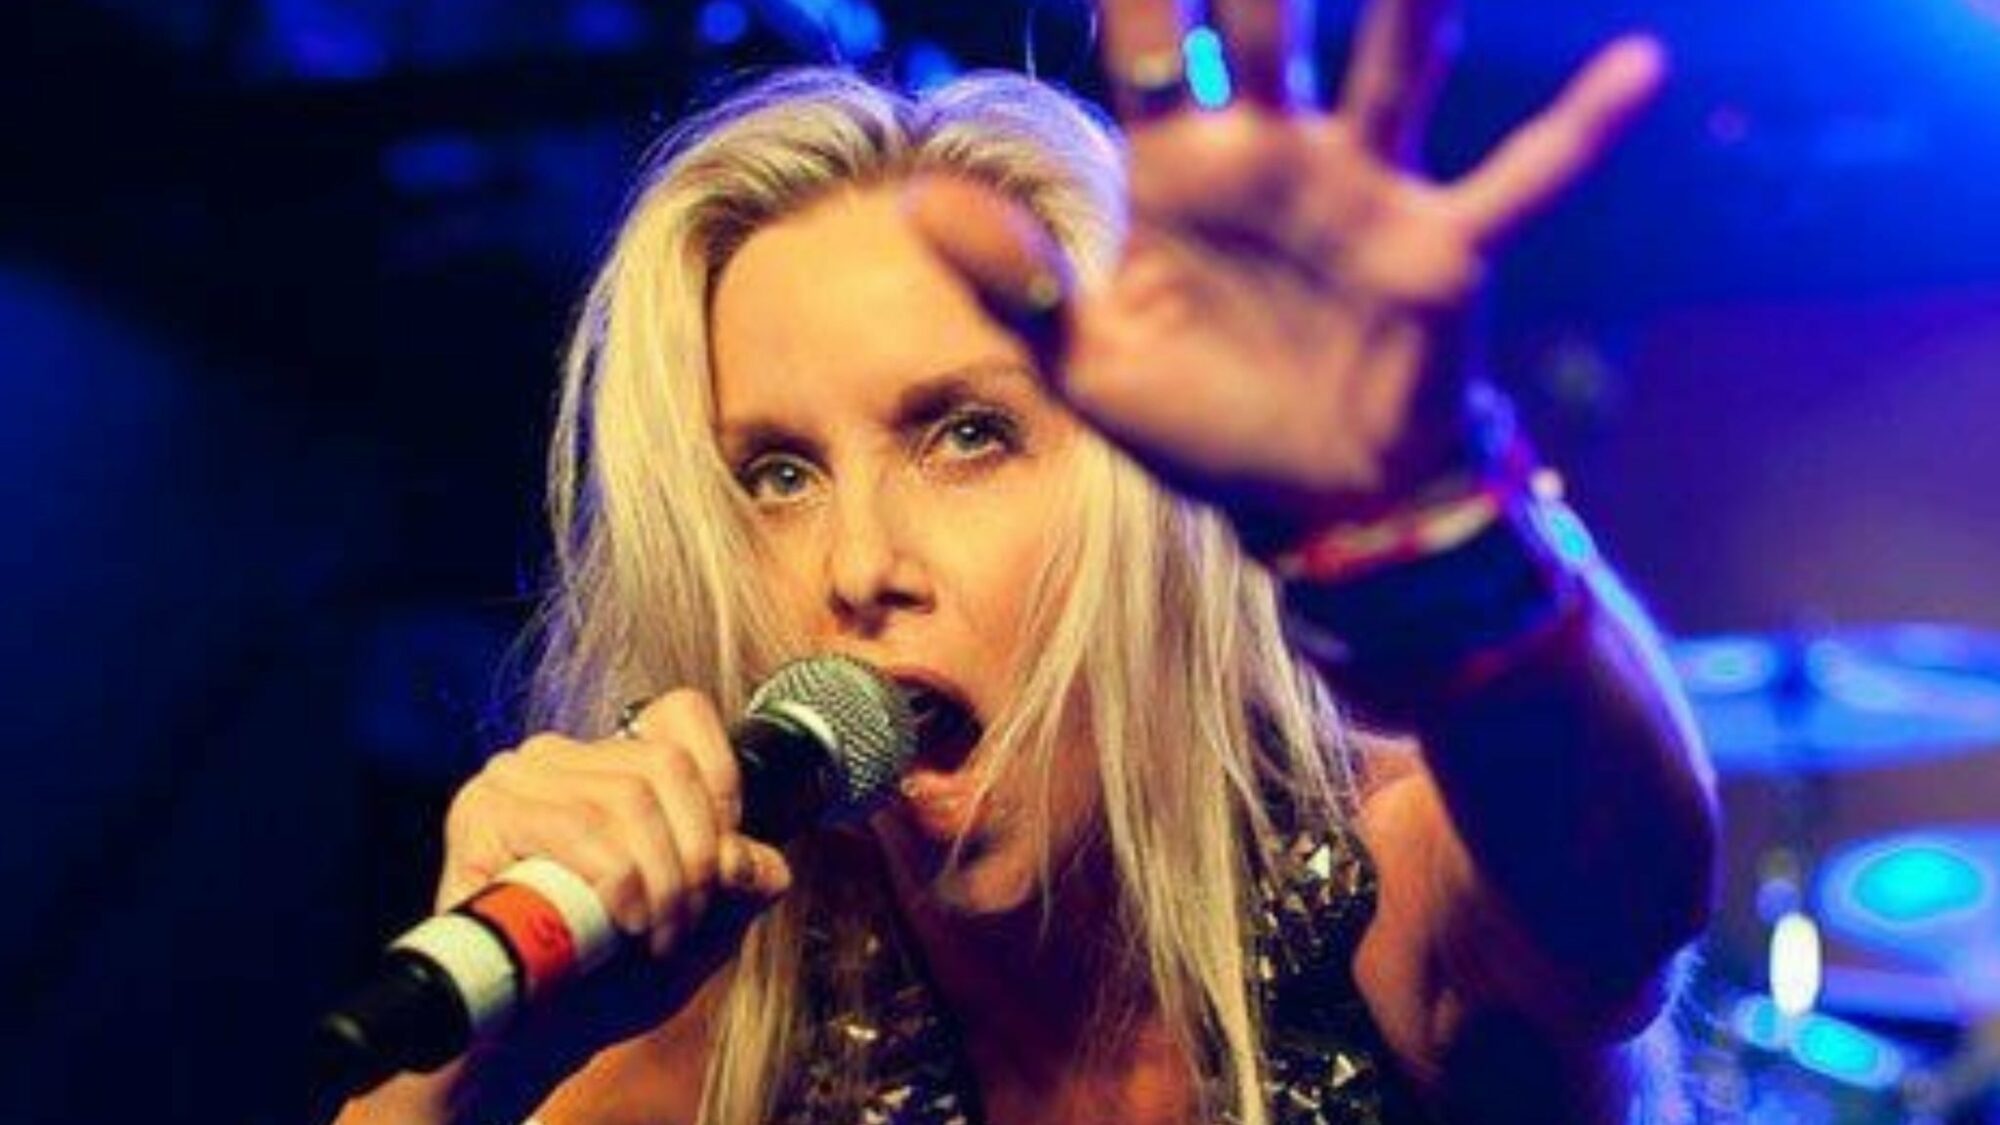 Image name Cherie Currie the Voice of the Runaways at Nightrain Bradford the 1 image from the post Cherie Currie - the Voice of the Runaways at Nightrain, Bradford in Yorkshire.com.